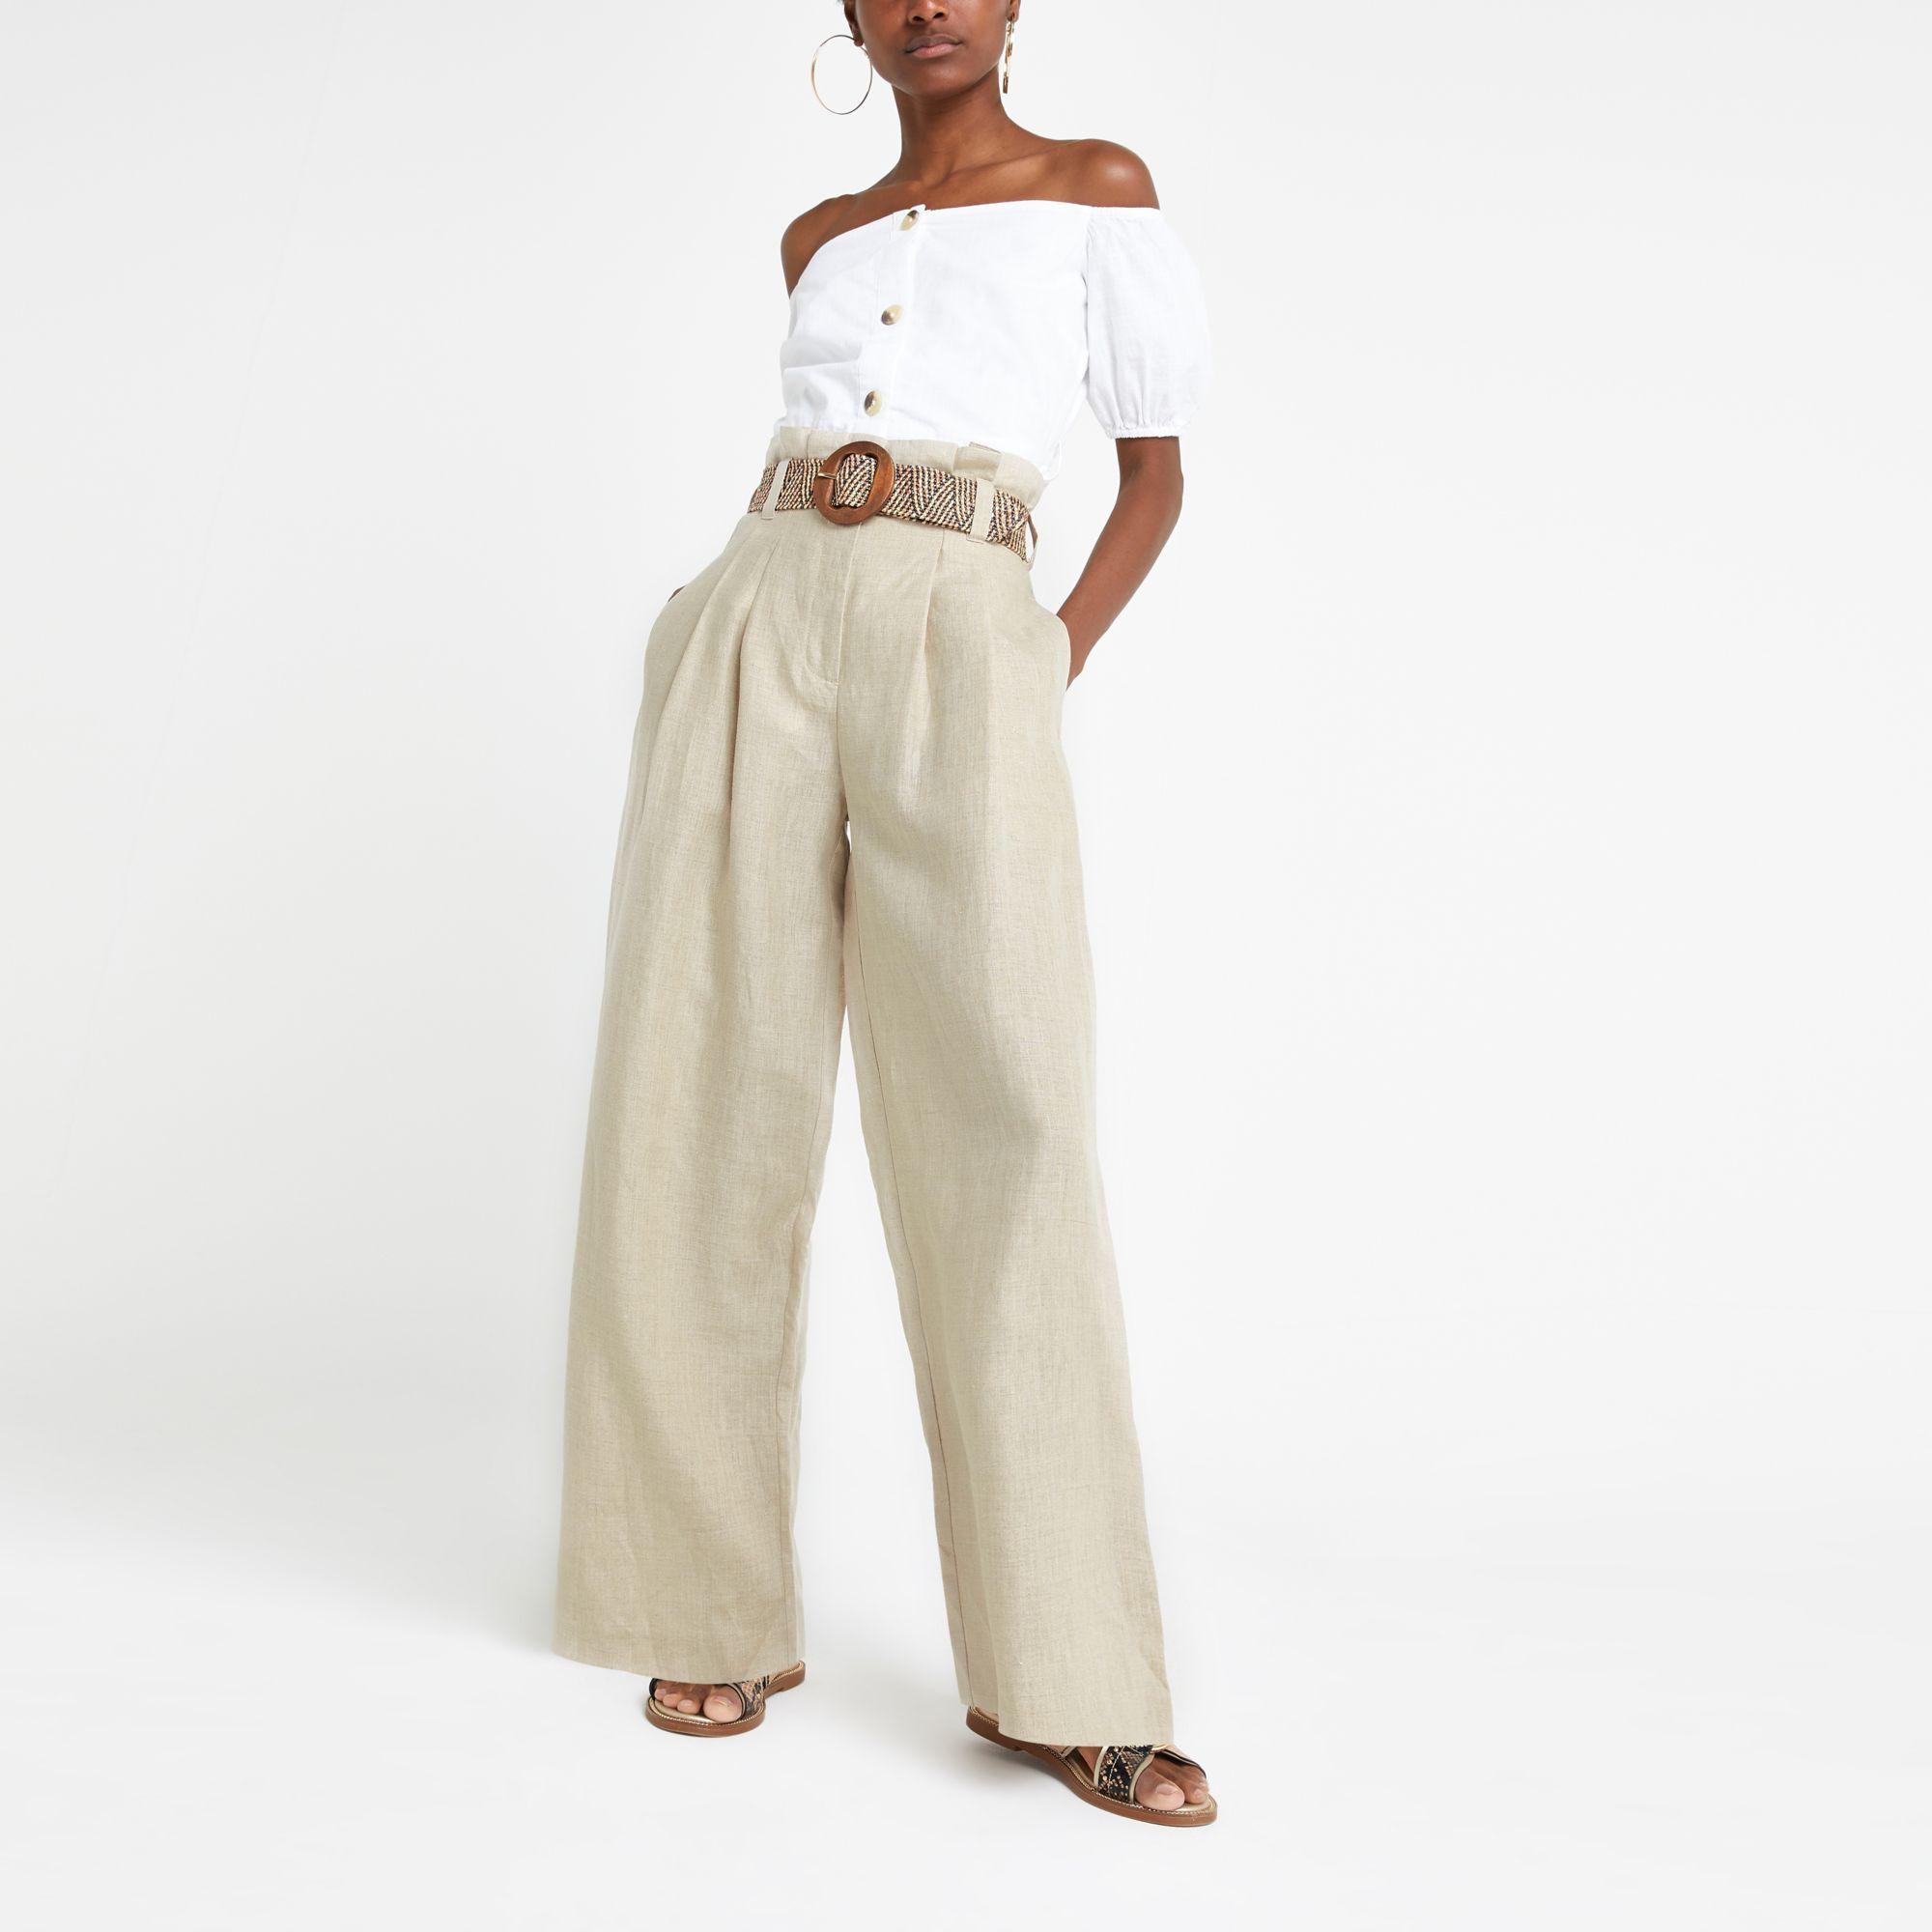 River Island Beige Linen Paperbag Waist Wide Leg Trousers in Natural | Lyst